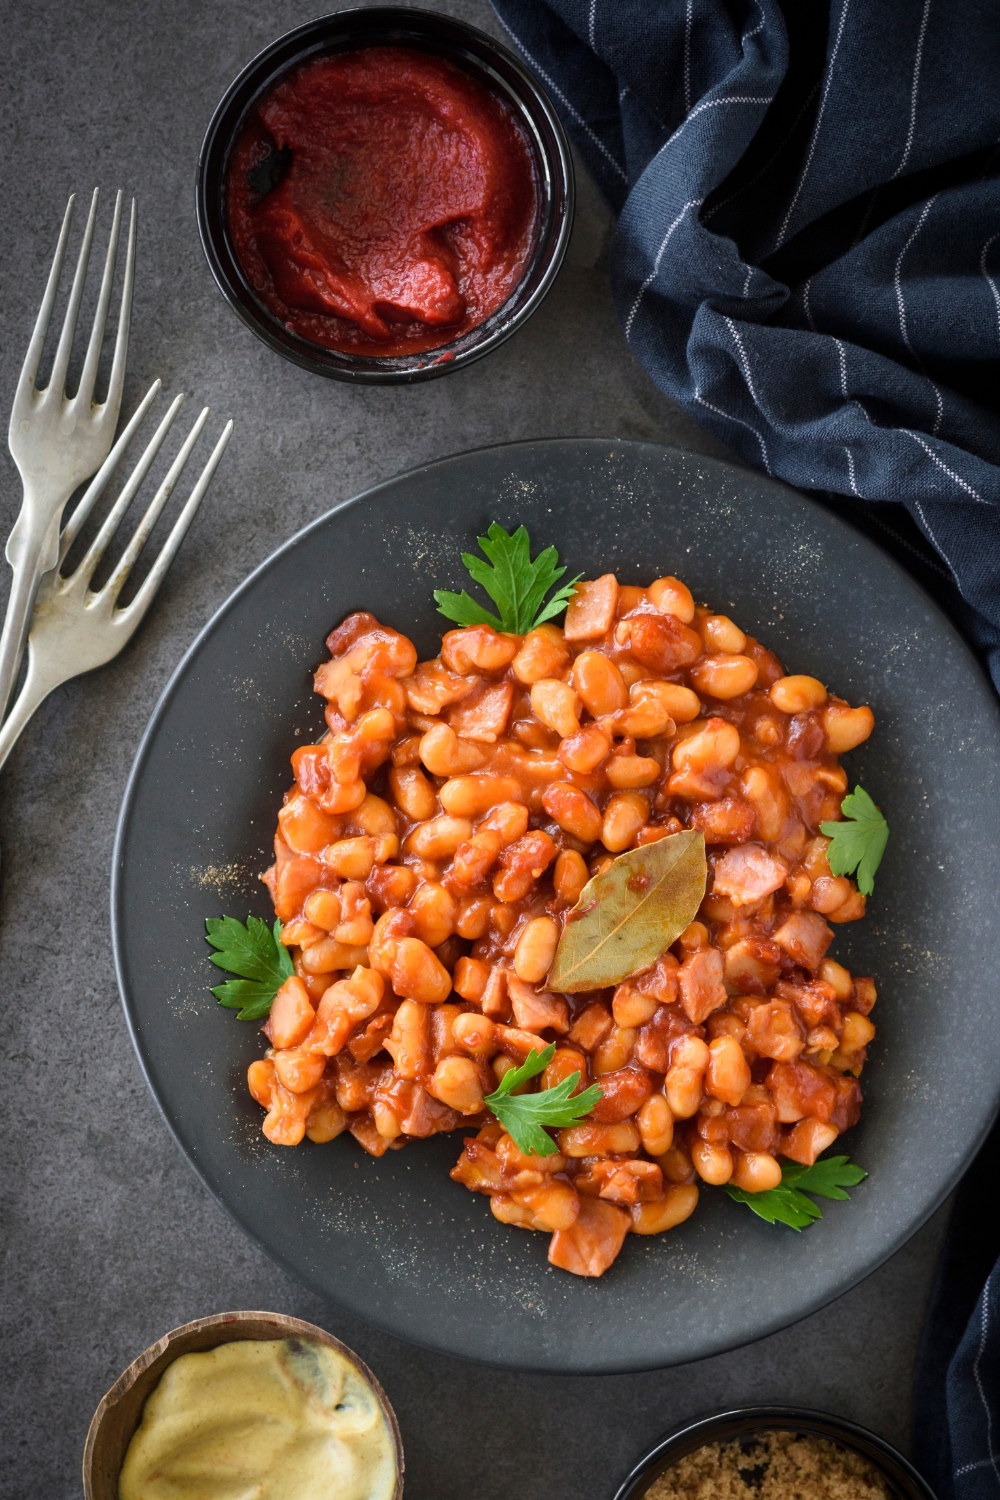 A black plate with cooked baked beans on it.